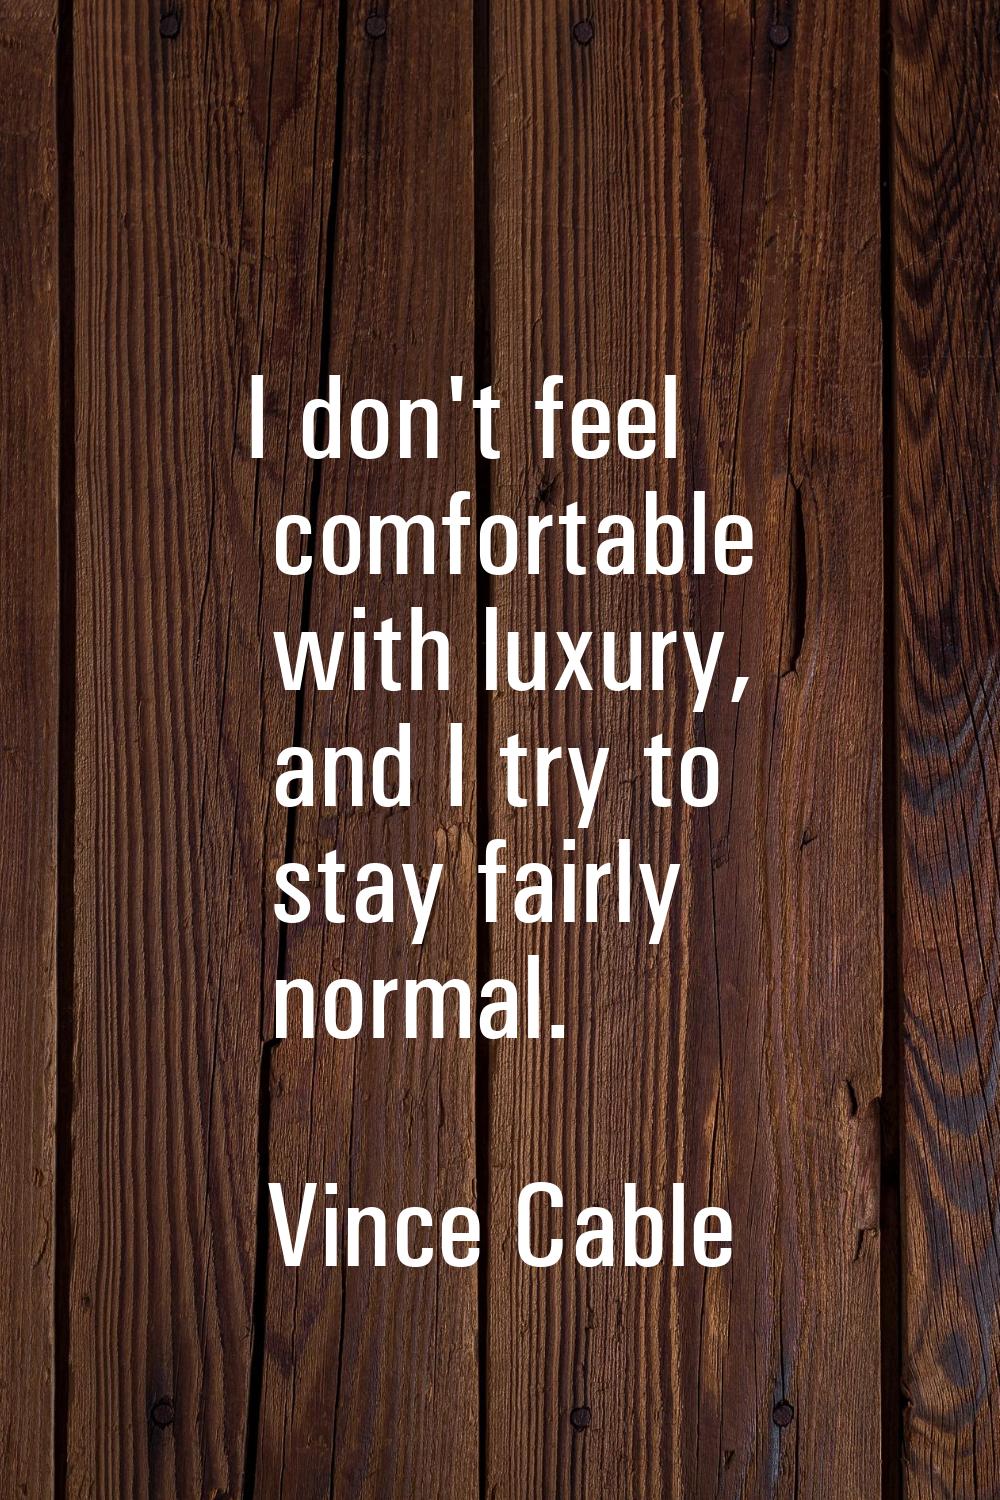 I don't feel comfortable with luxury, and I try to stay fairly normal.